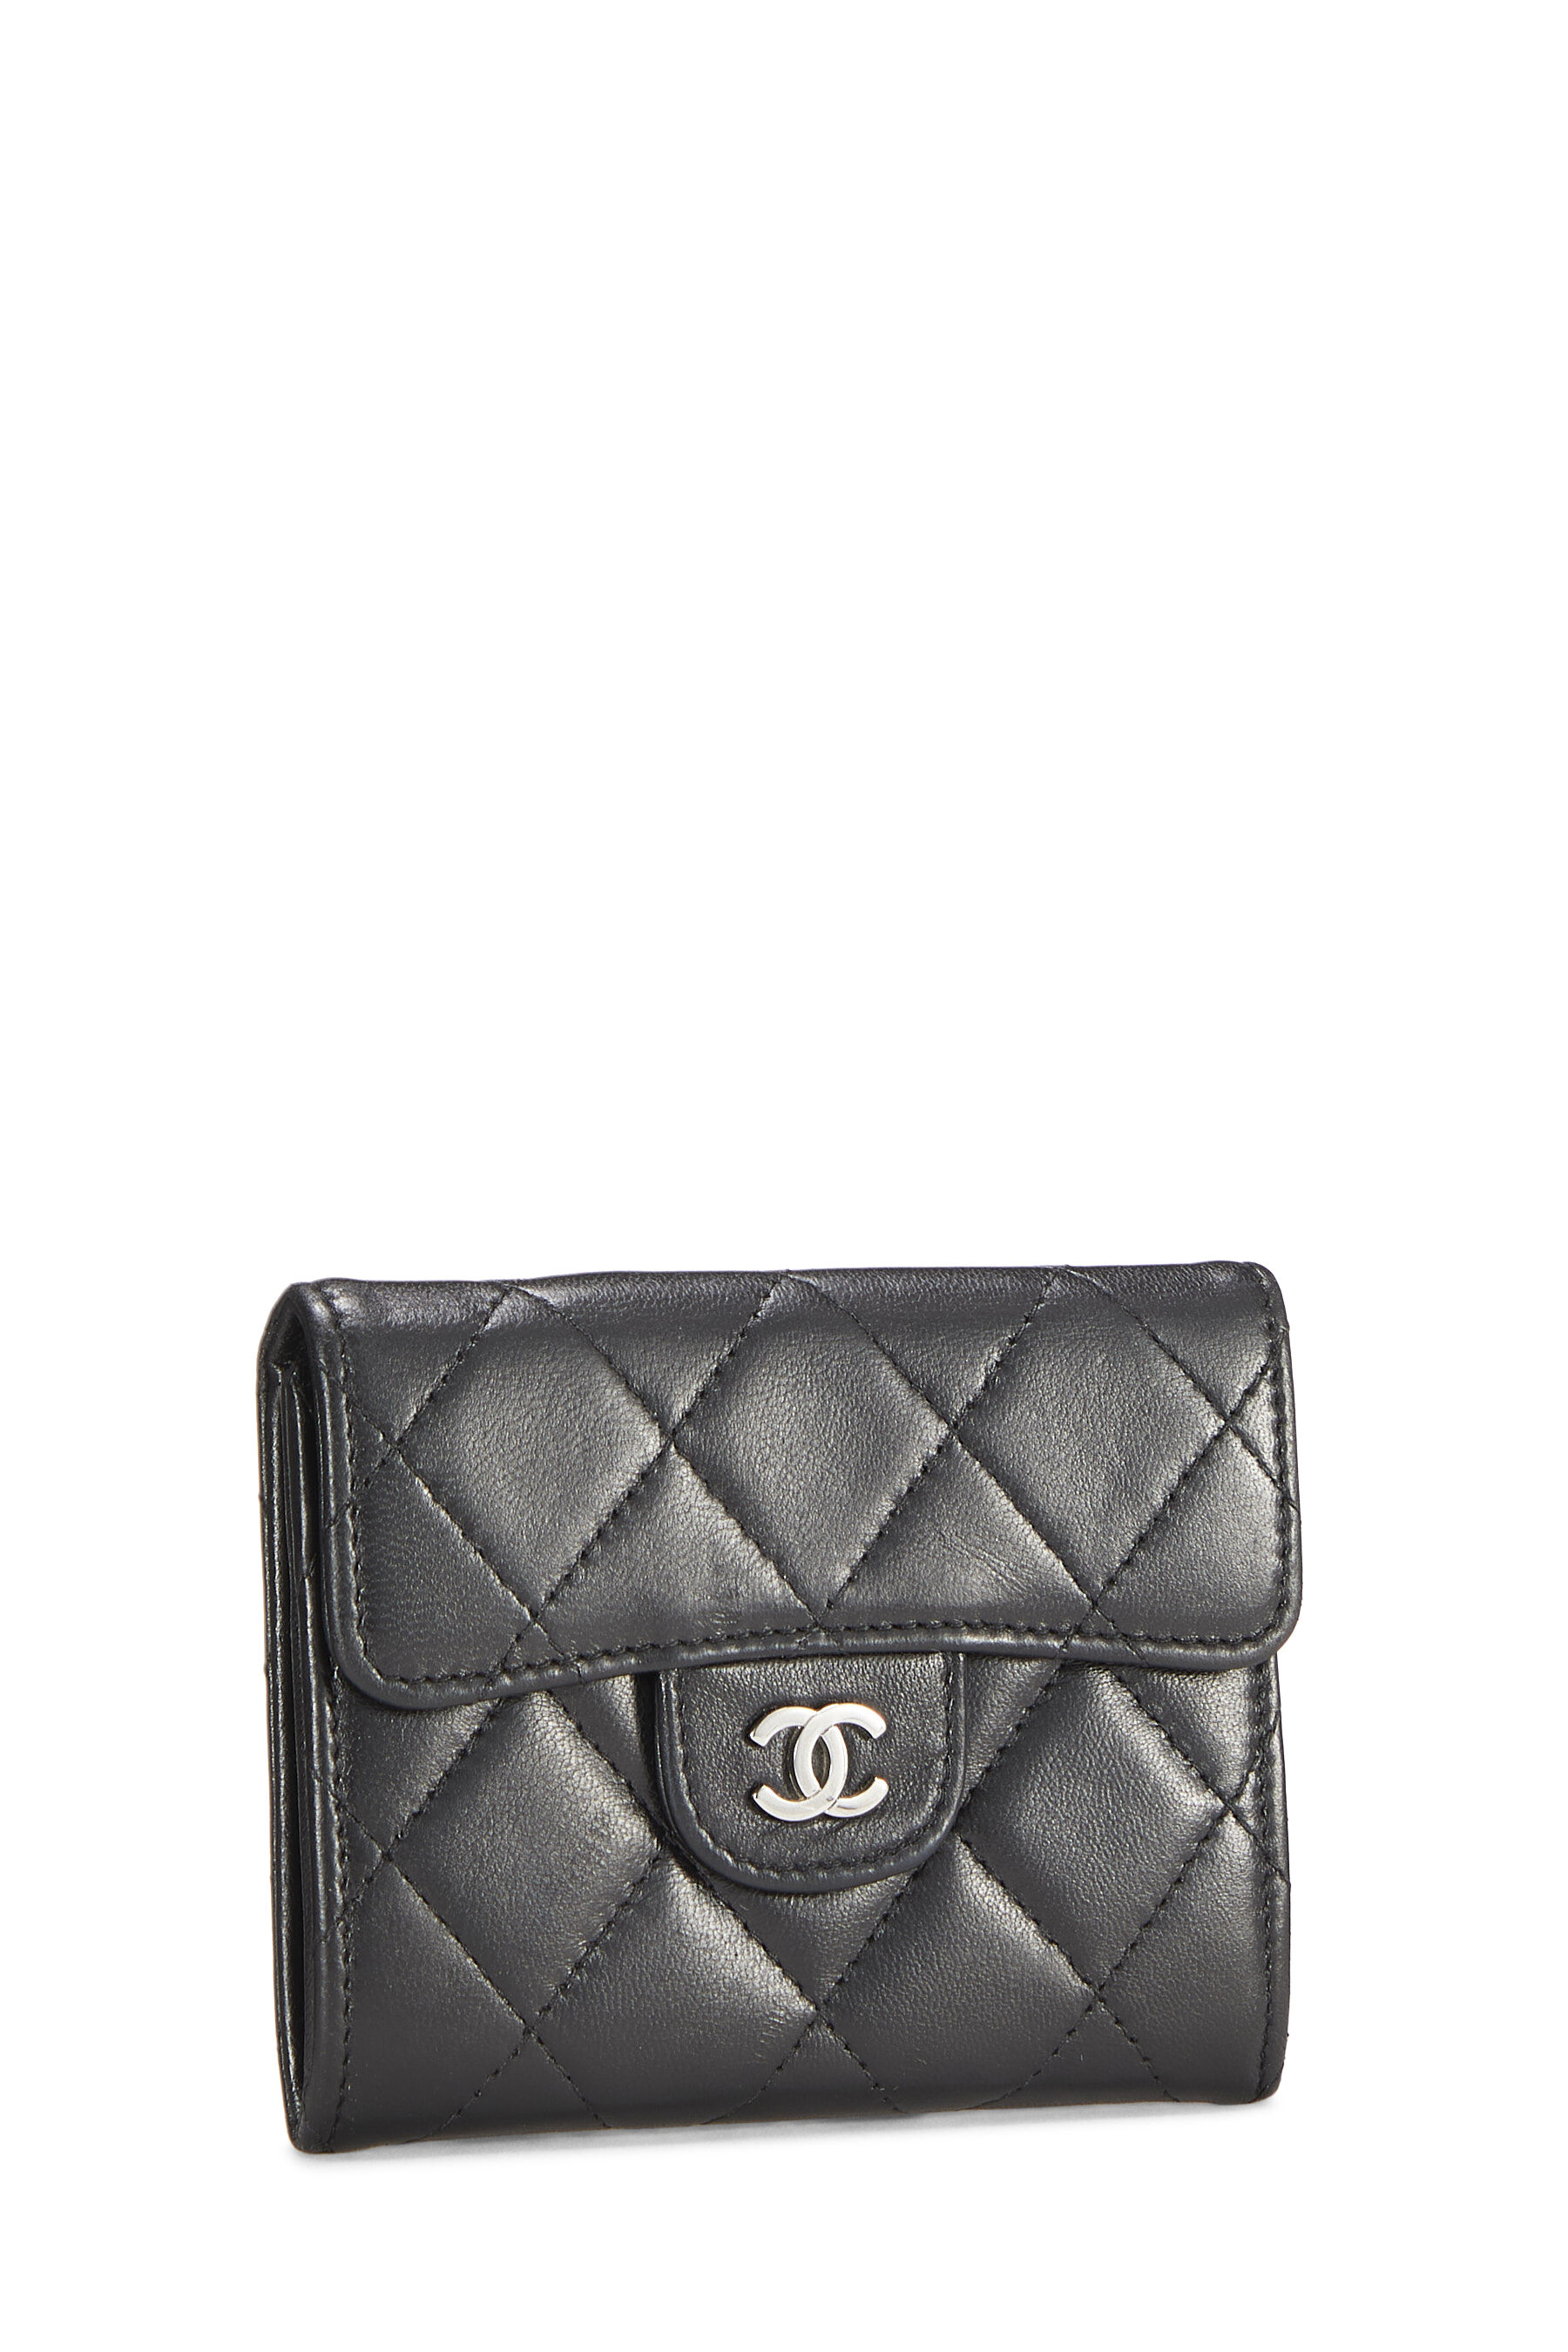 Chanel Black Quilted Lambskin Classic Flap Card Holder